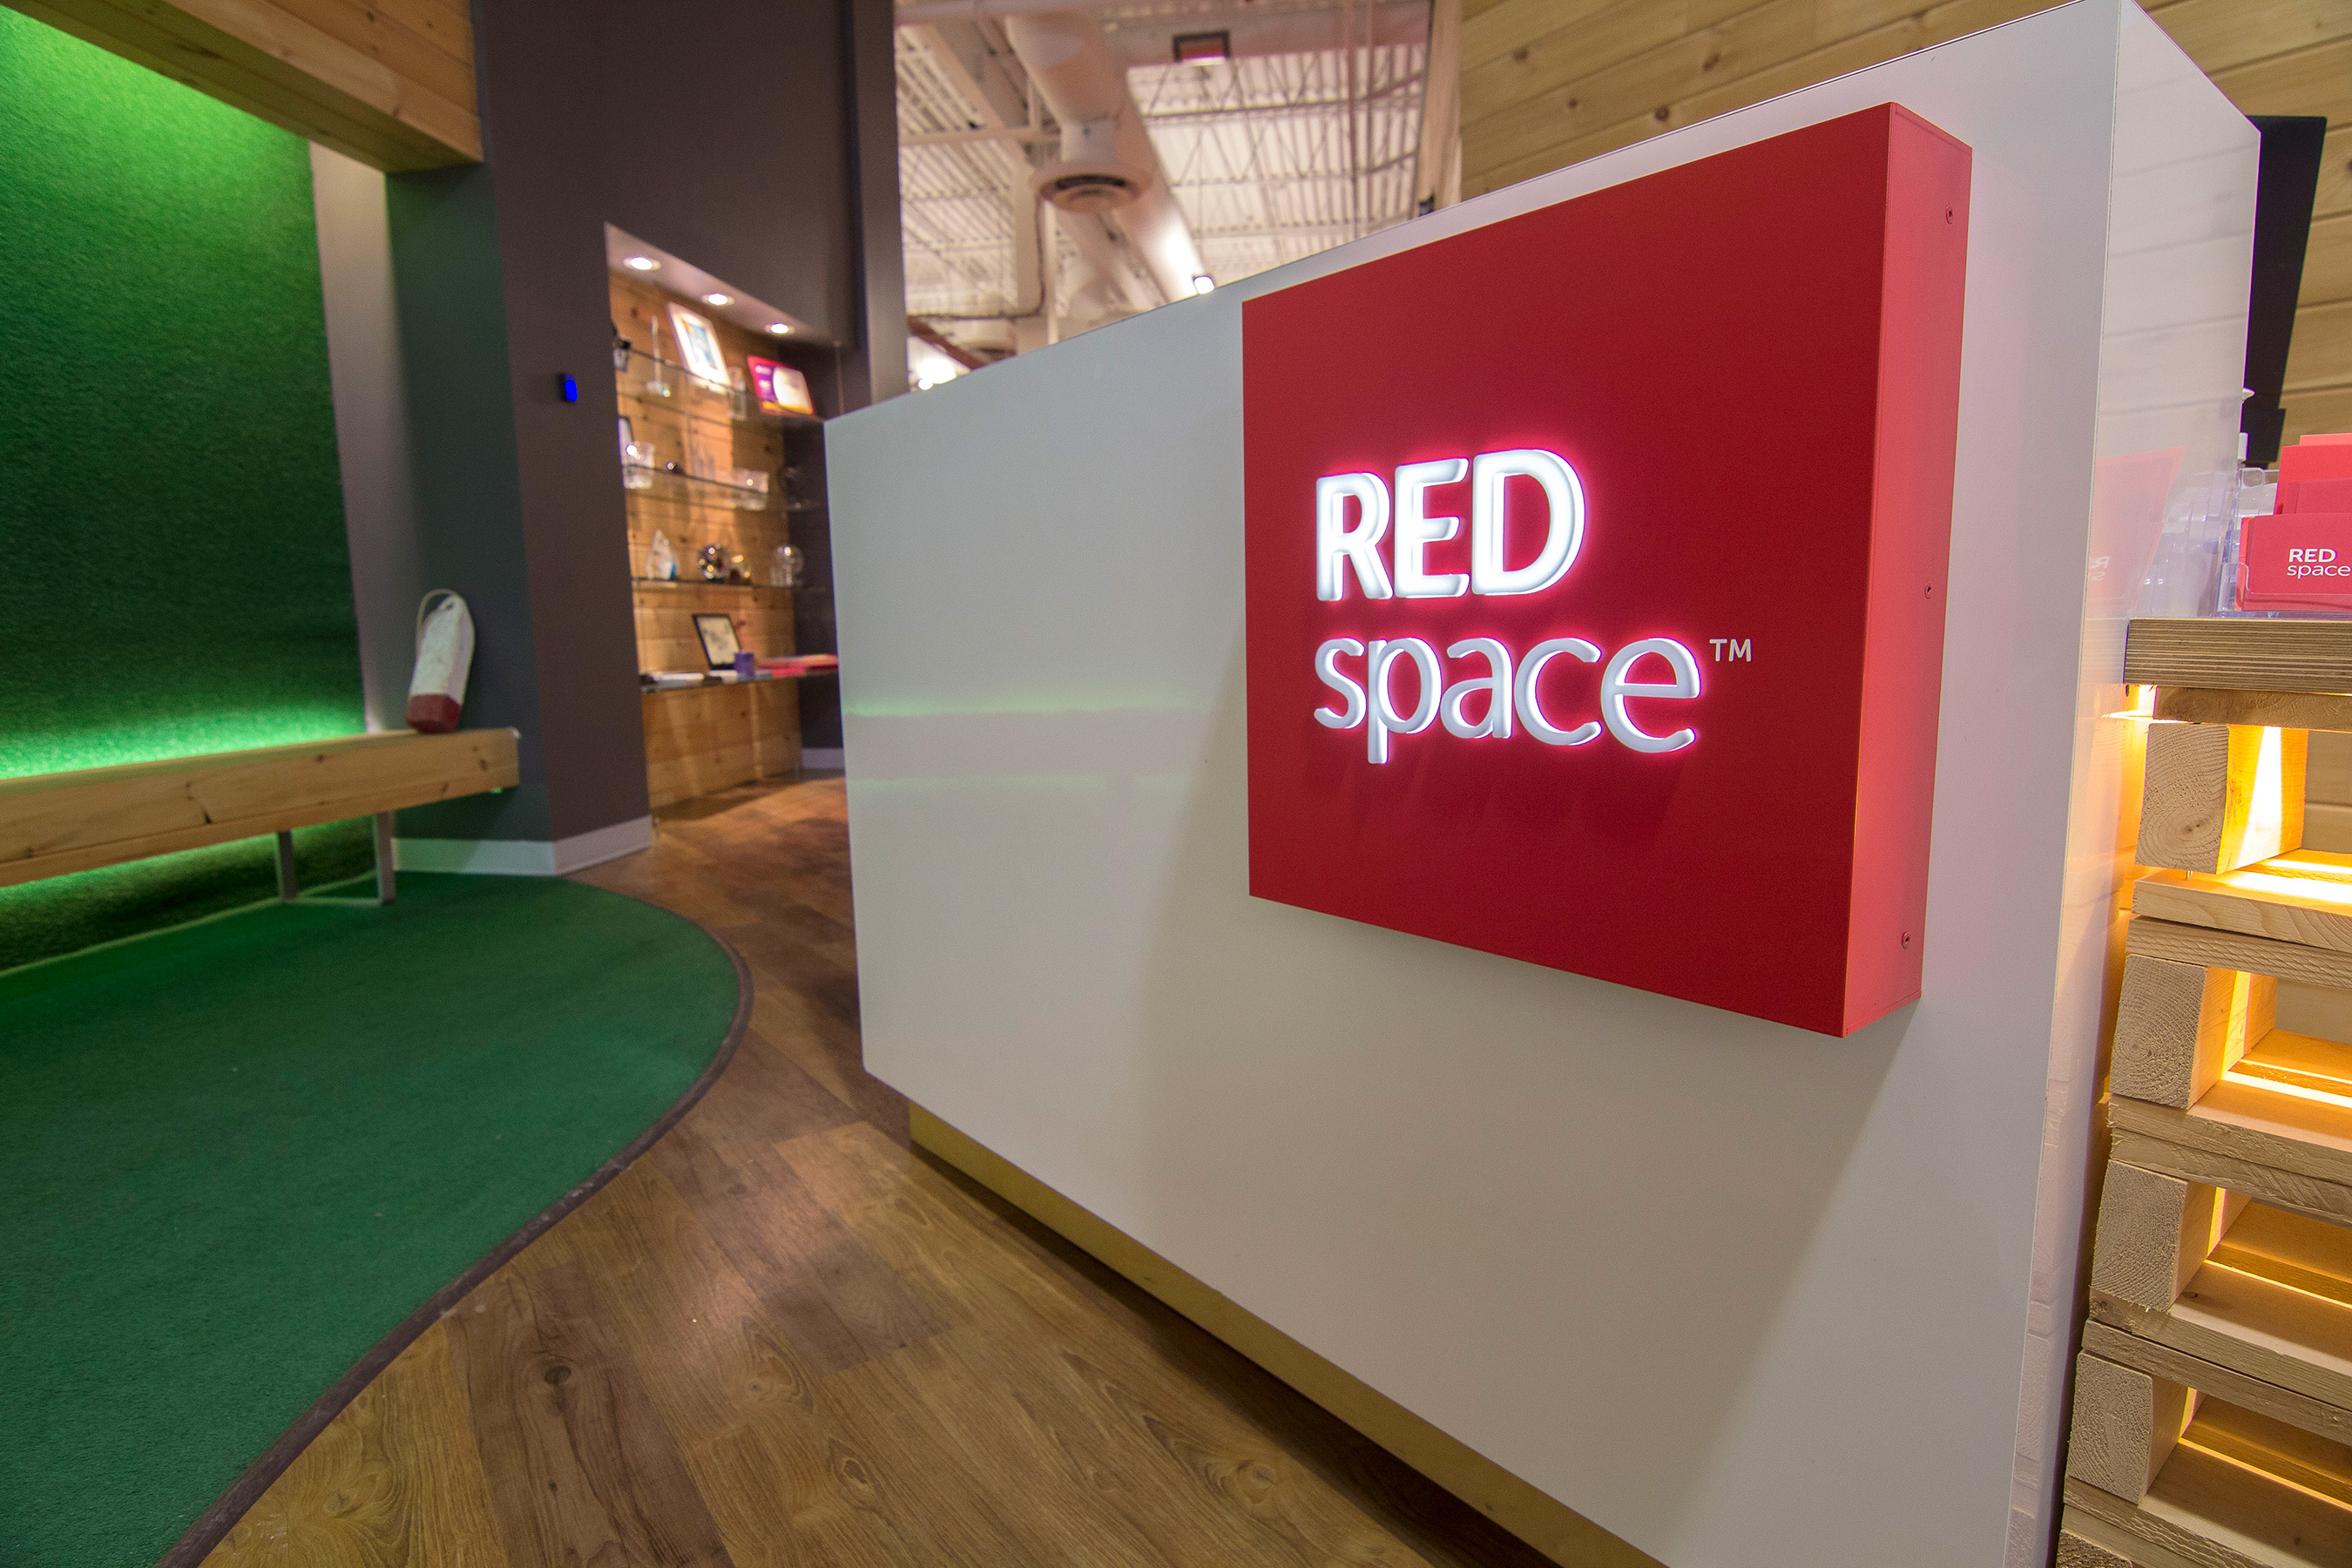 REDspace in Nova Scotia: Looking back on two decades of business